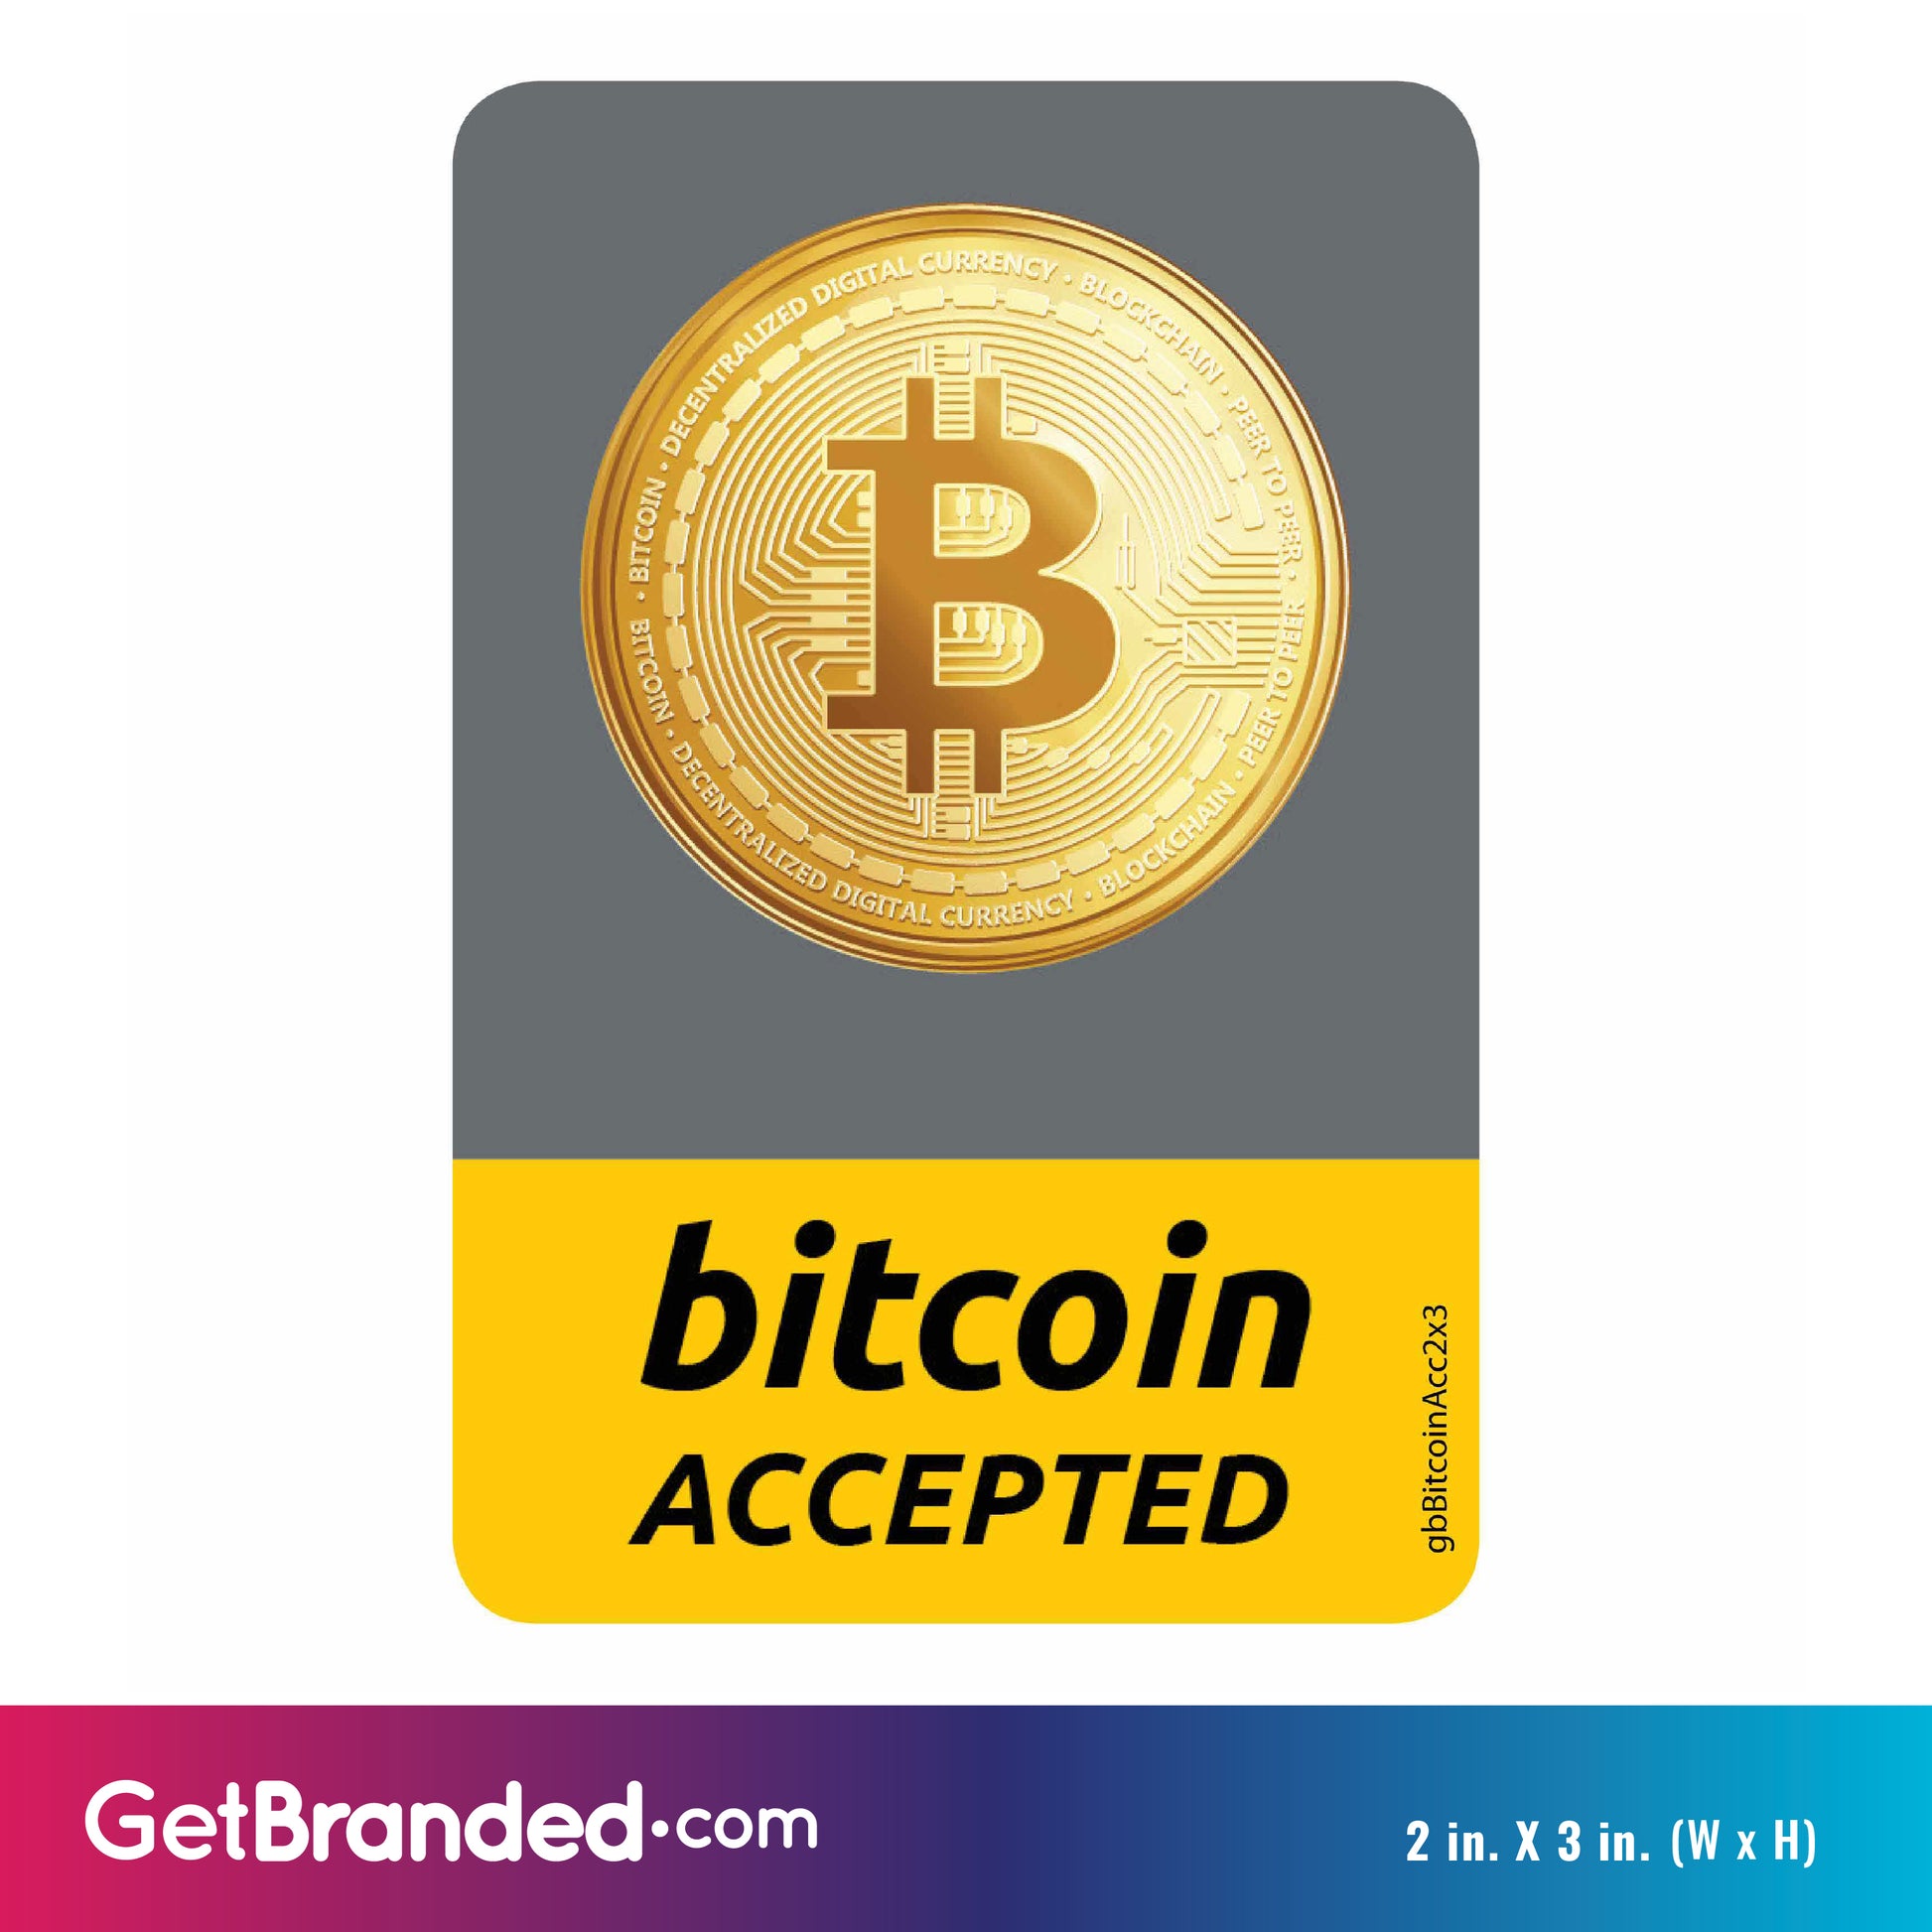 Bitcoin Accepted Decal size guide. 2 inches by 3 inches in size.